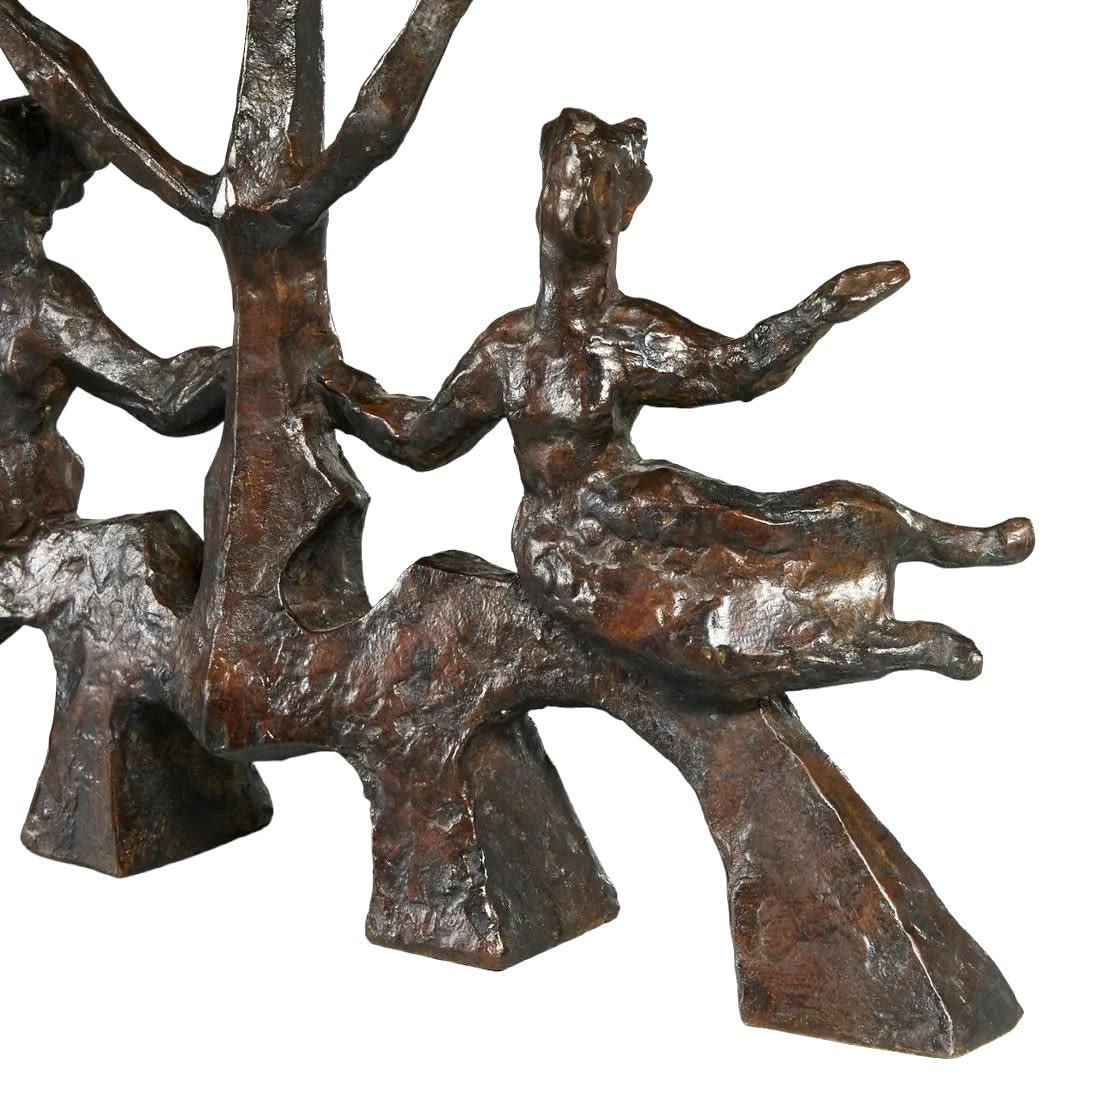 Chaim Gross 1902 - 1991, Bronze Menorah

Signed and numbered 1/6 on back foot,

13.5